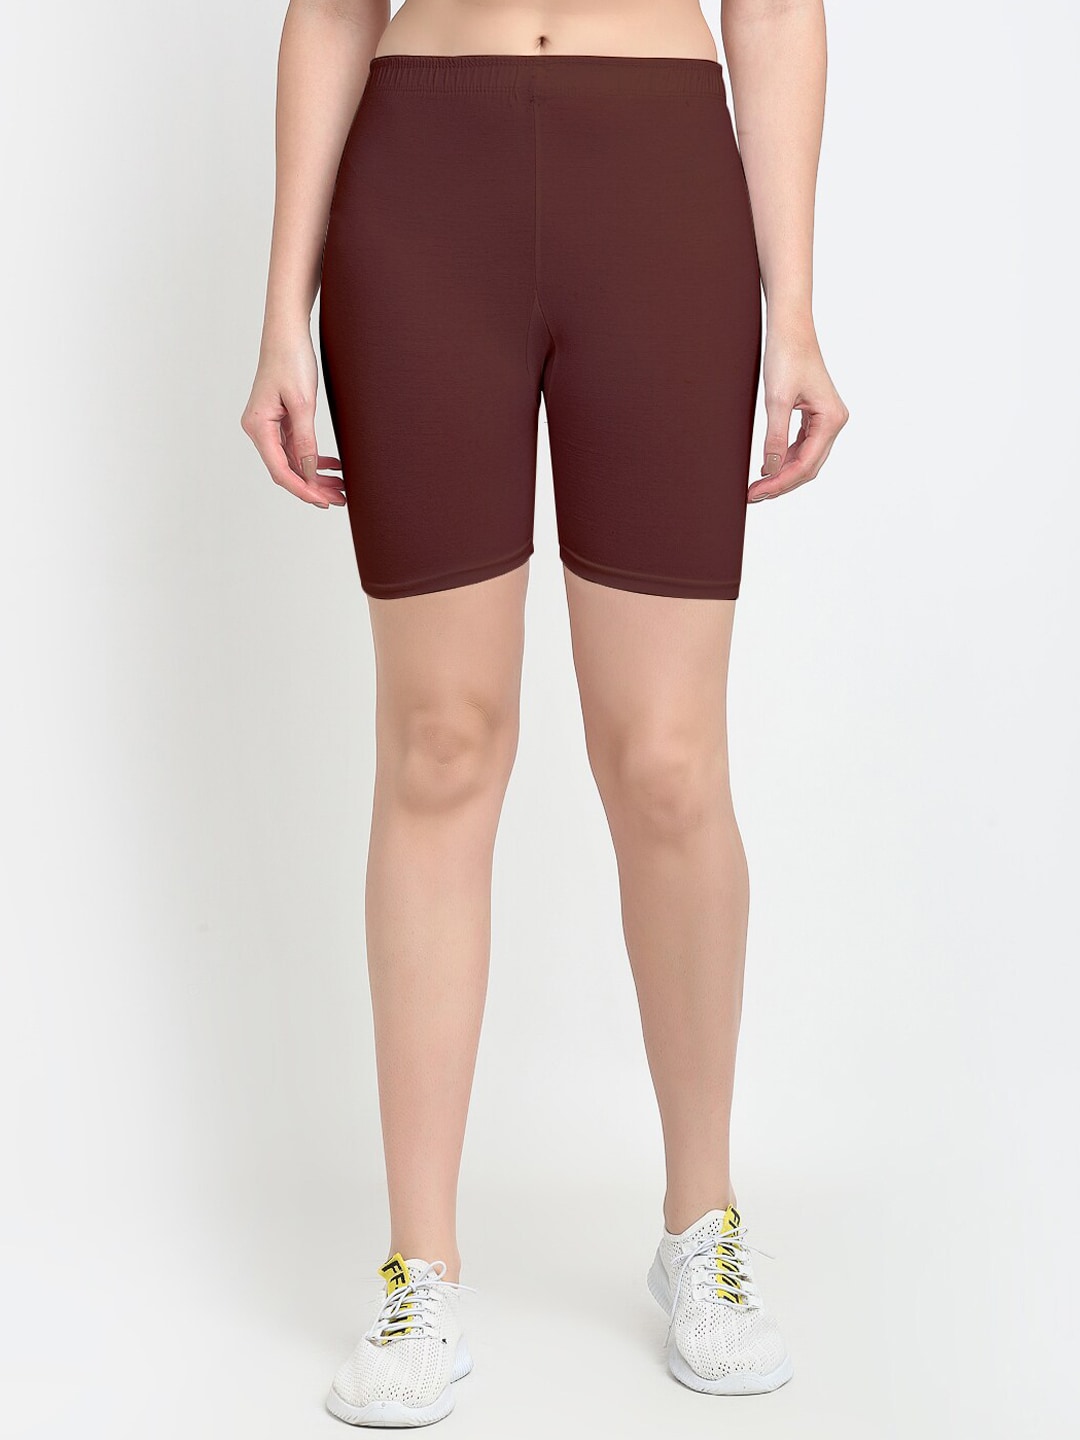 GRACIT Women Brown Cycling Sports Shorts Price in India